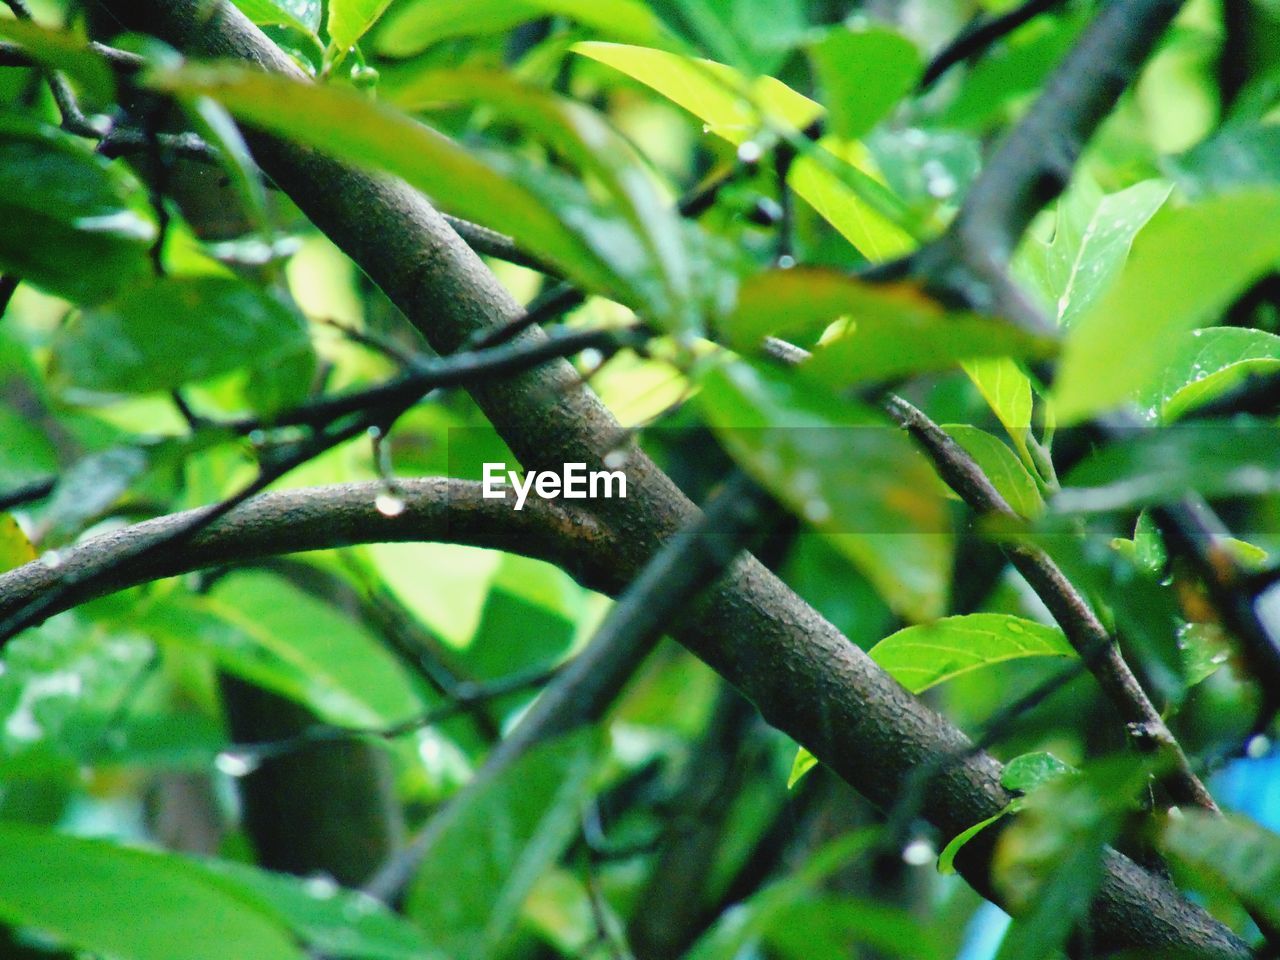 CLOSE-UP OF FRESH GREEN LEAVES ON BRANCH